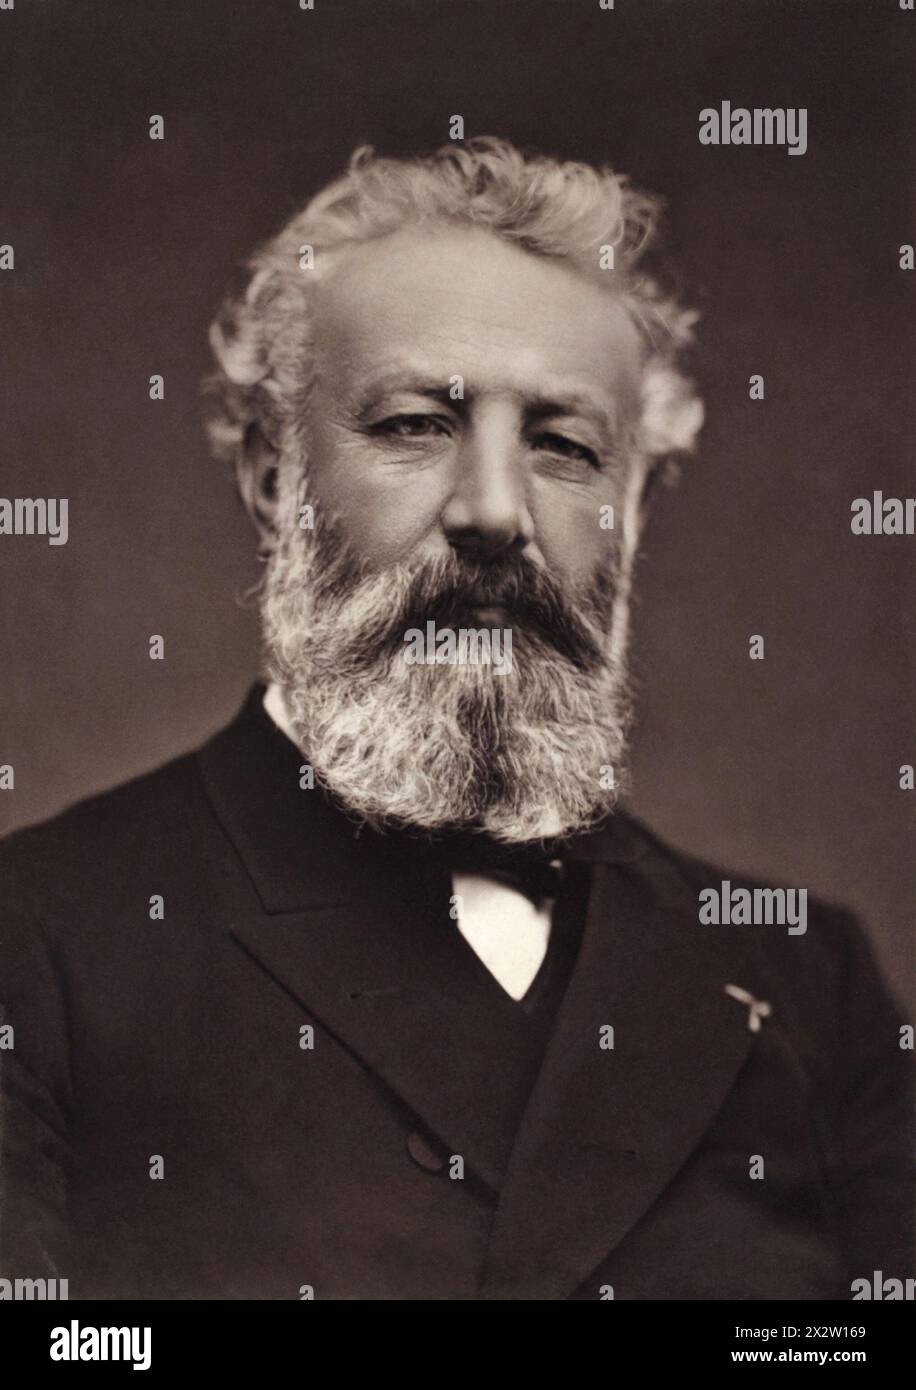 Vintage Portrait of French Author Jules Verne, by Etienne Carjat, circa 1880s Stock Photo